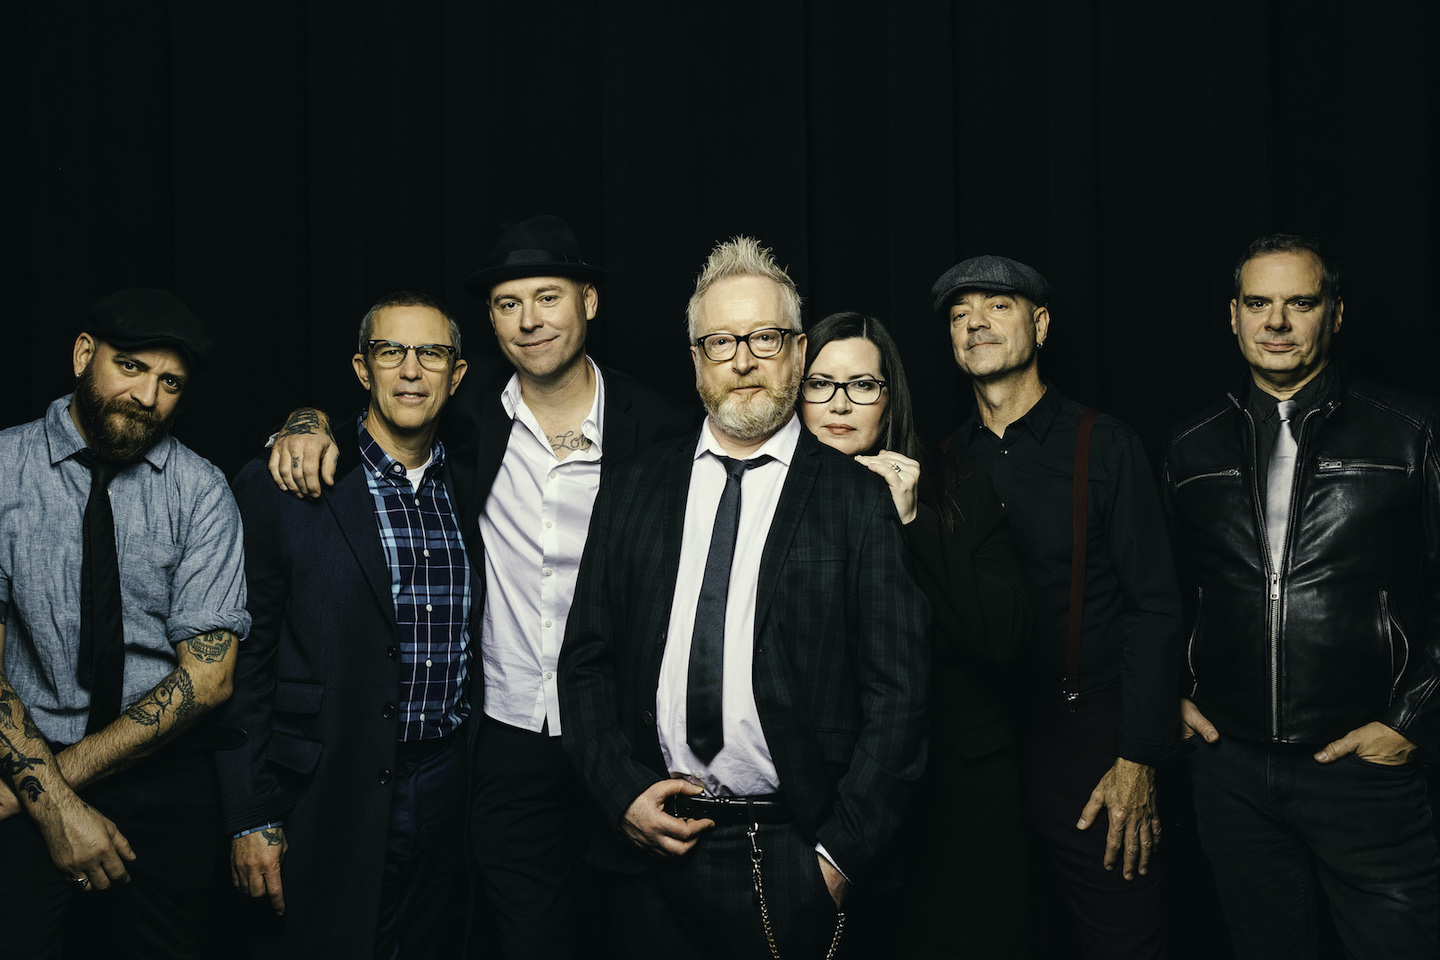 Flogging Molly will headline a concert at Artpark Saturday, July 2. Live music begins at 6 p.m. For more information, or for tickets, visit https://www.artpark.net/events/flogging-molly-the-interrupters. (Photo by Katie Hovland)